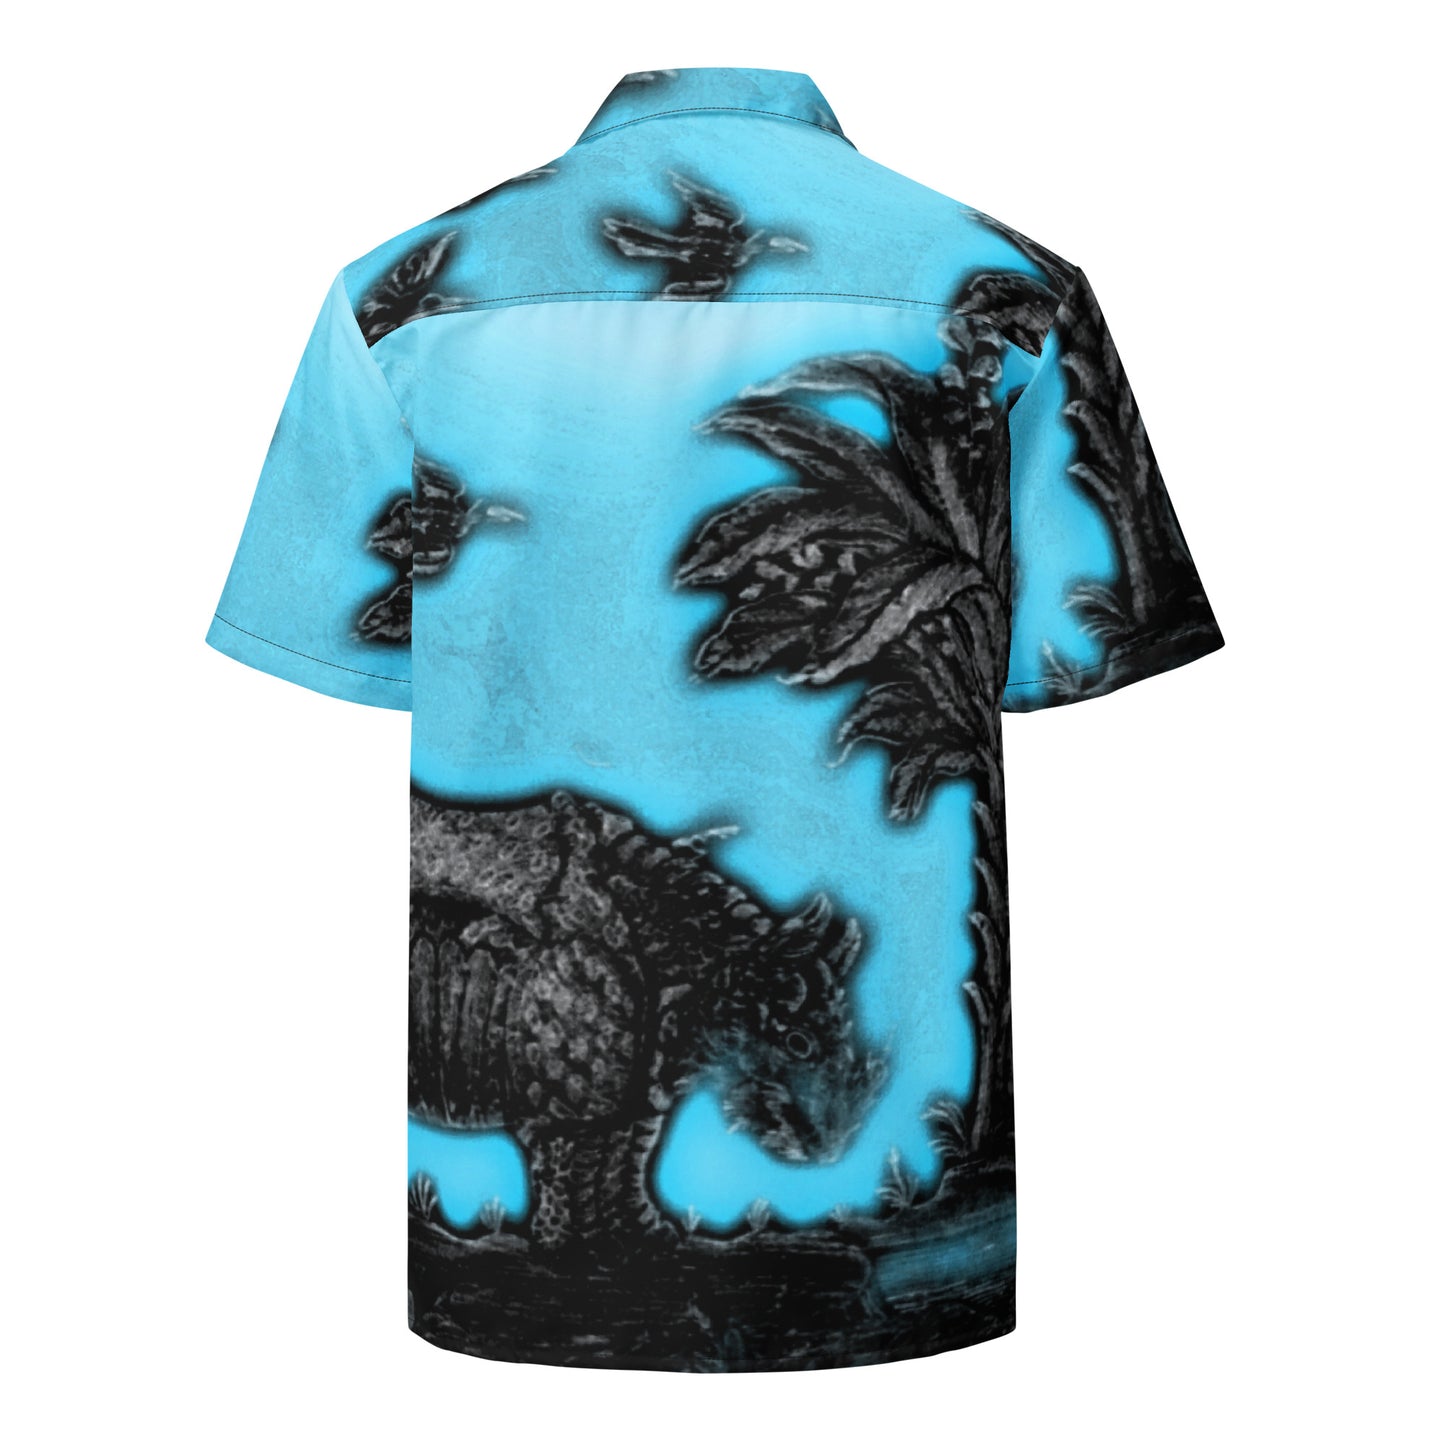 Exquisite Floral Tropical Rhino Unisex button down t-shirt